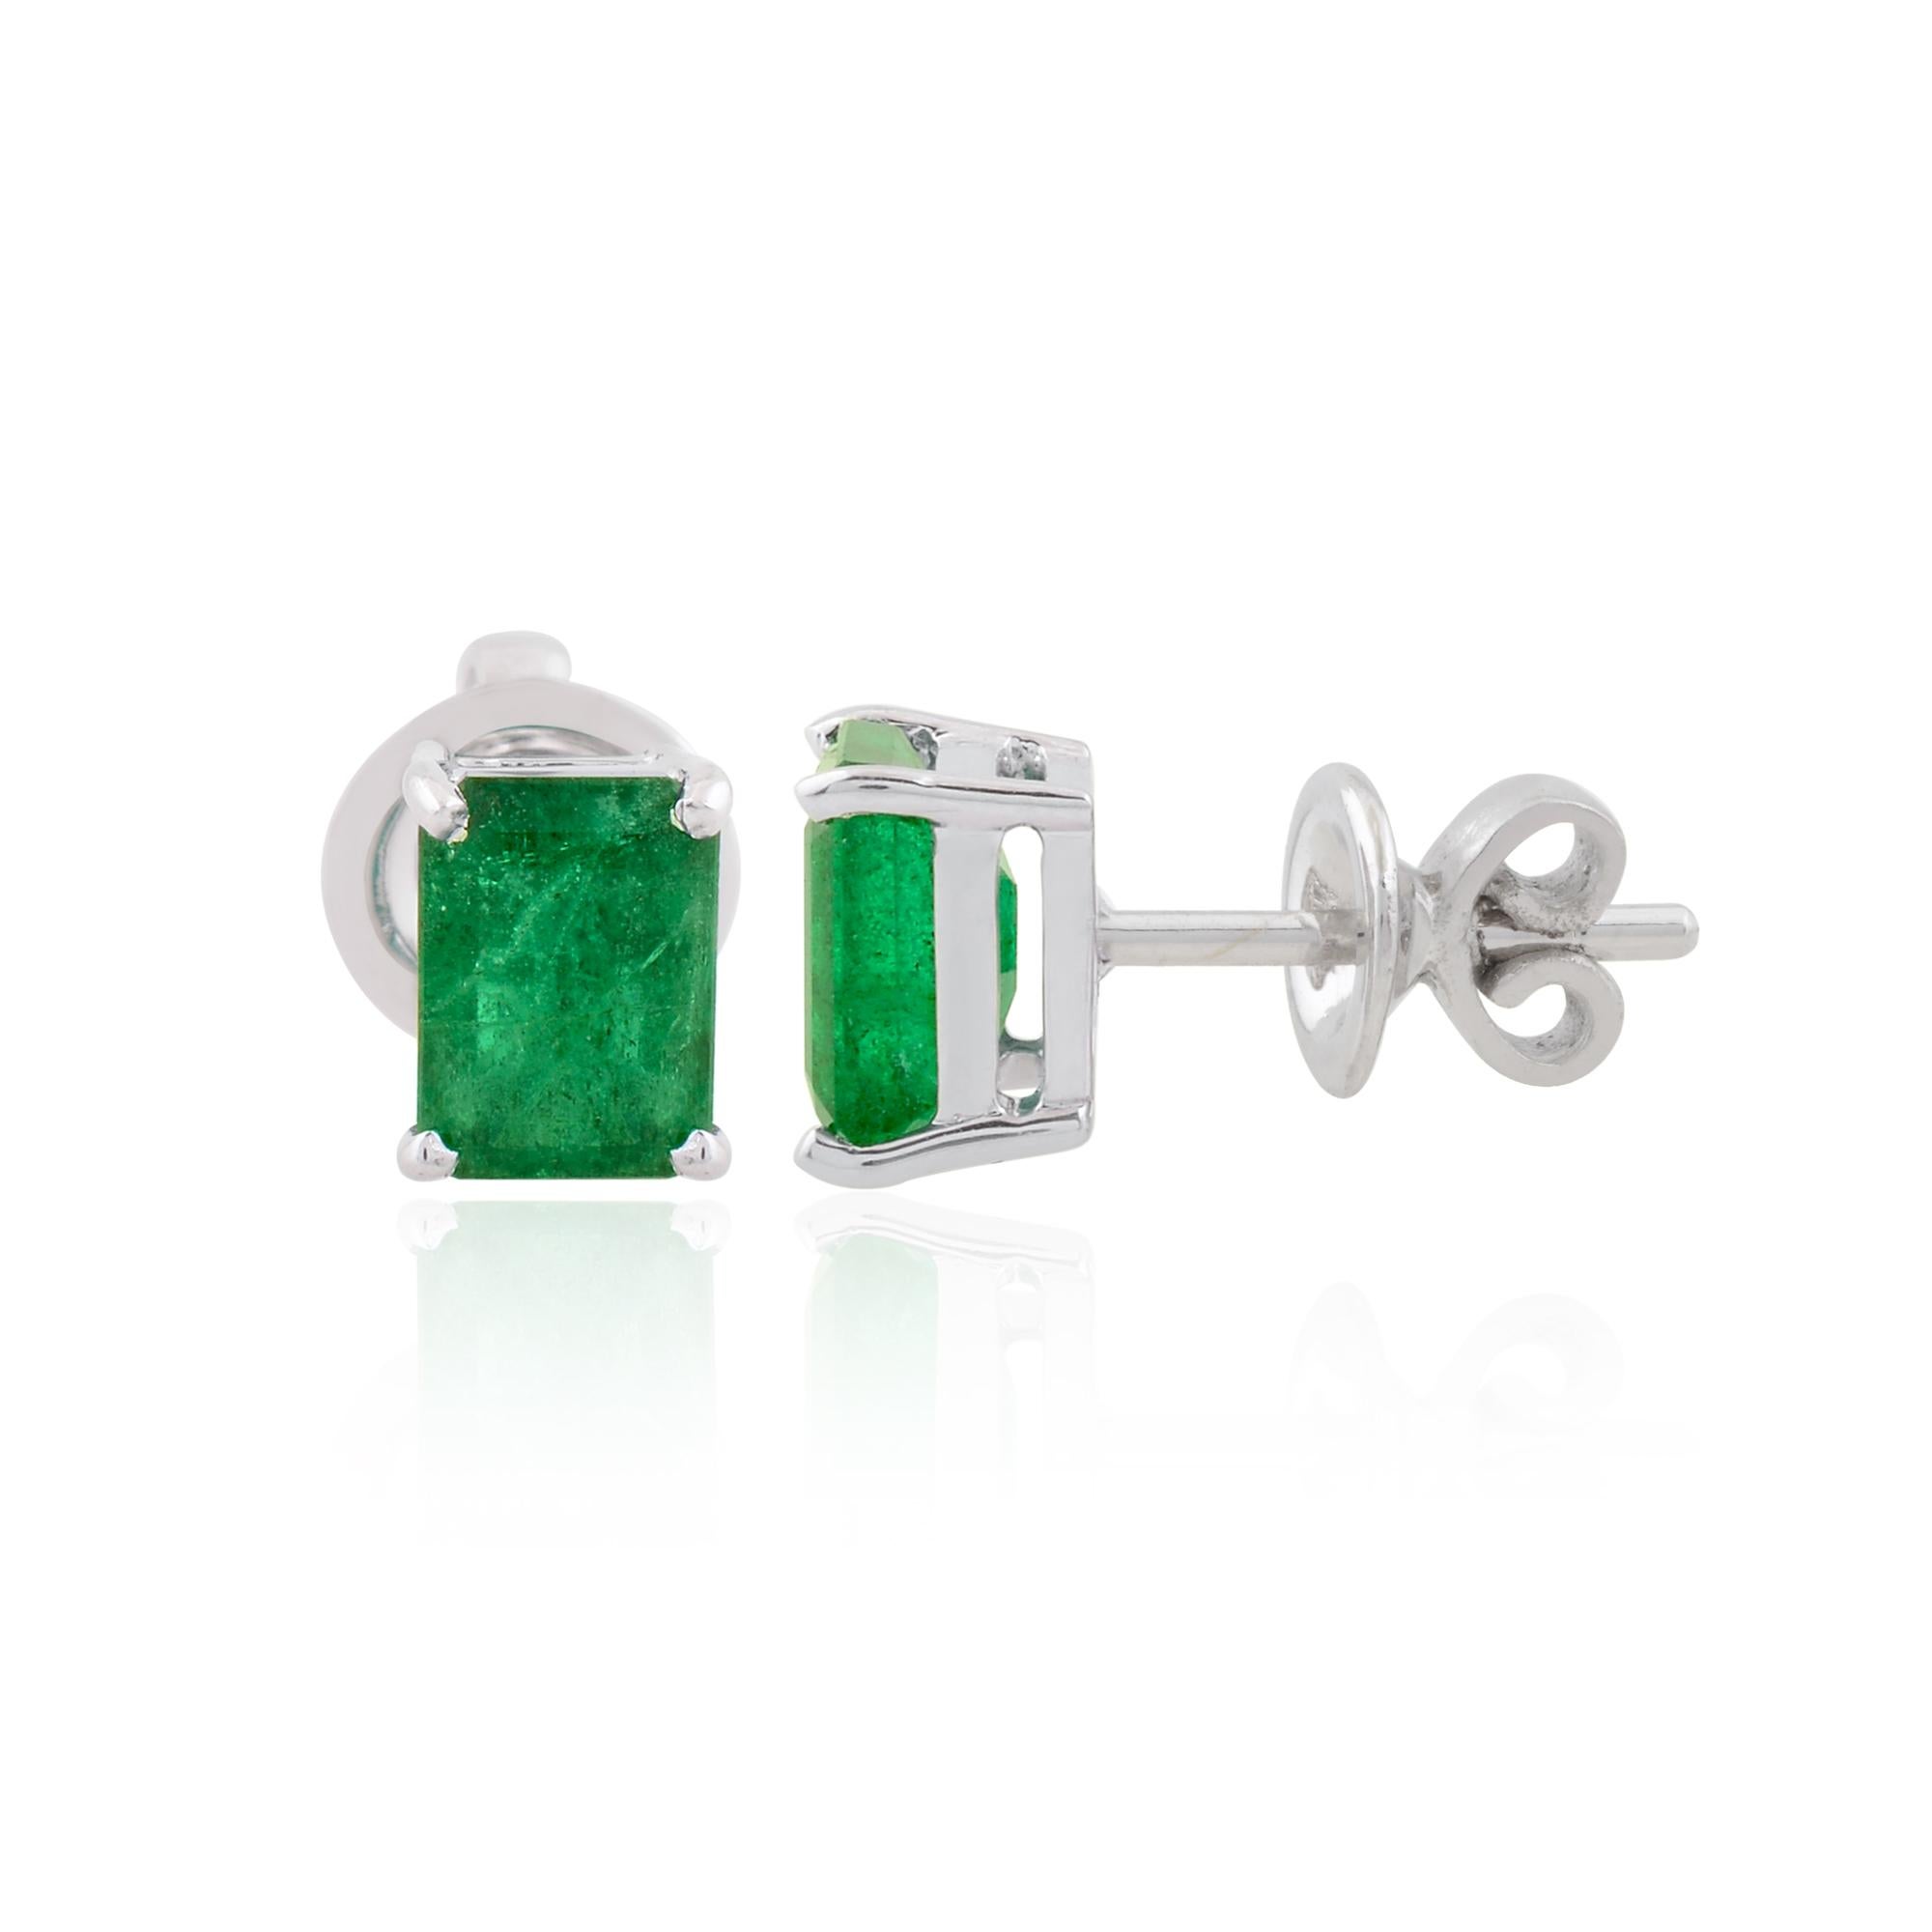 The classic stud design of these earrings makes them versatile and timeless, perfect for any occasion and ensemble. Whether worn as everyday accessories or paired with formal attire, these Zambian Emerald Gemstone Stud Earrings effortlessly elevate